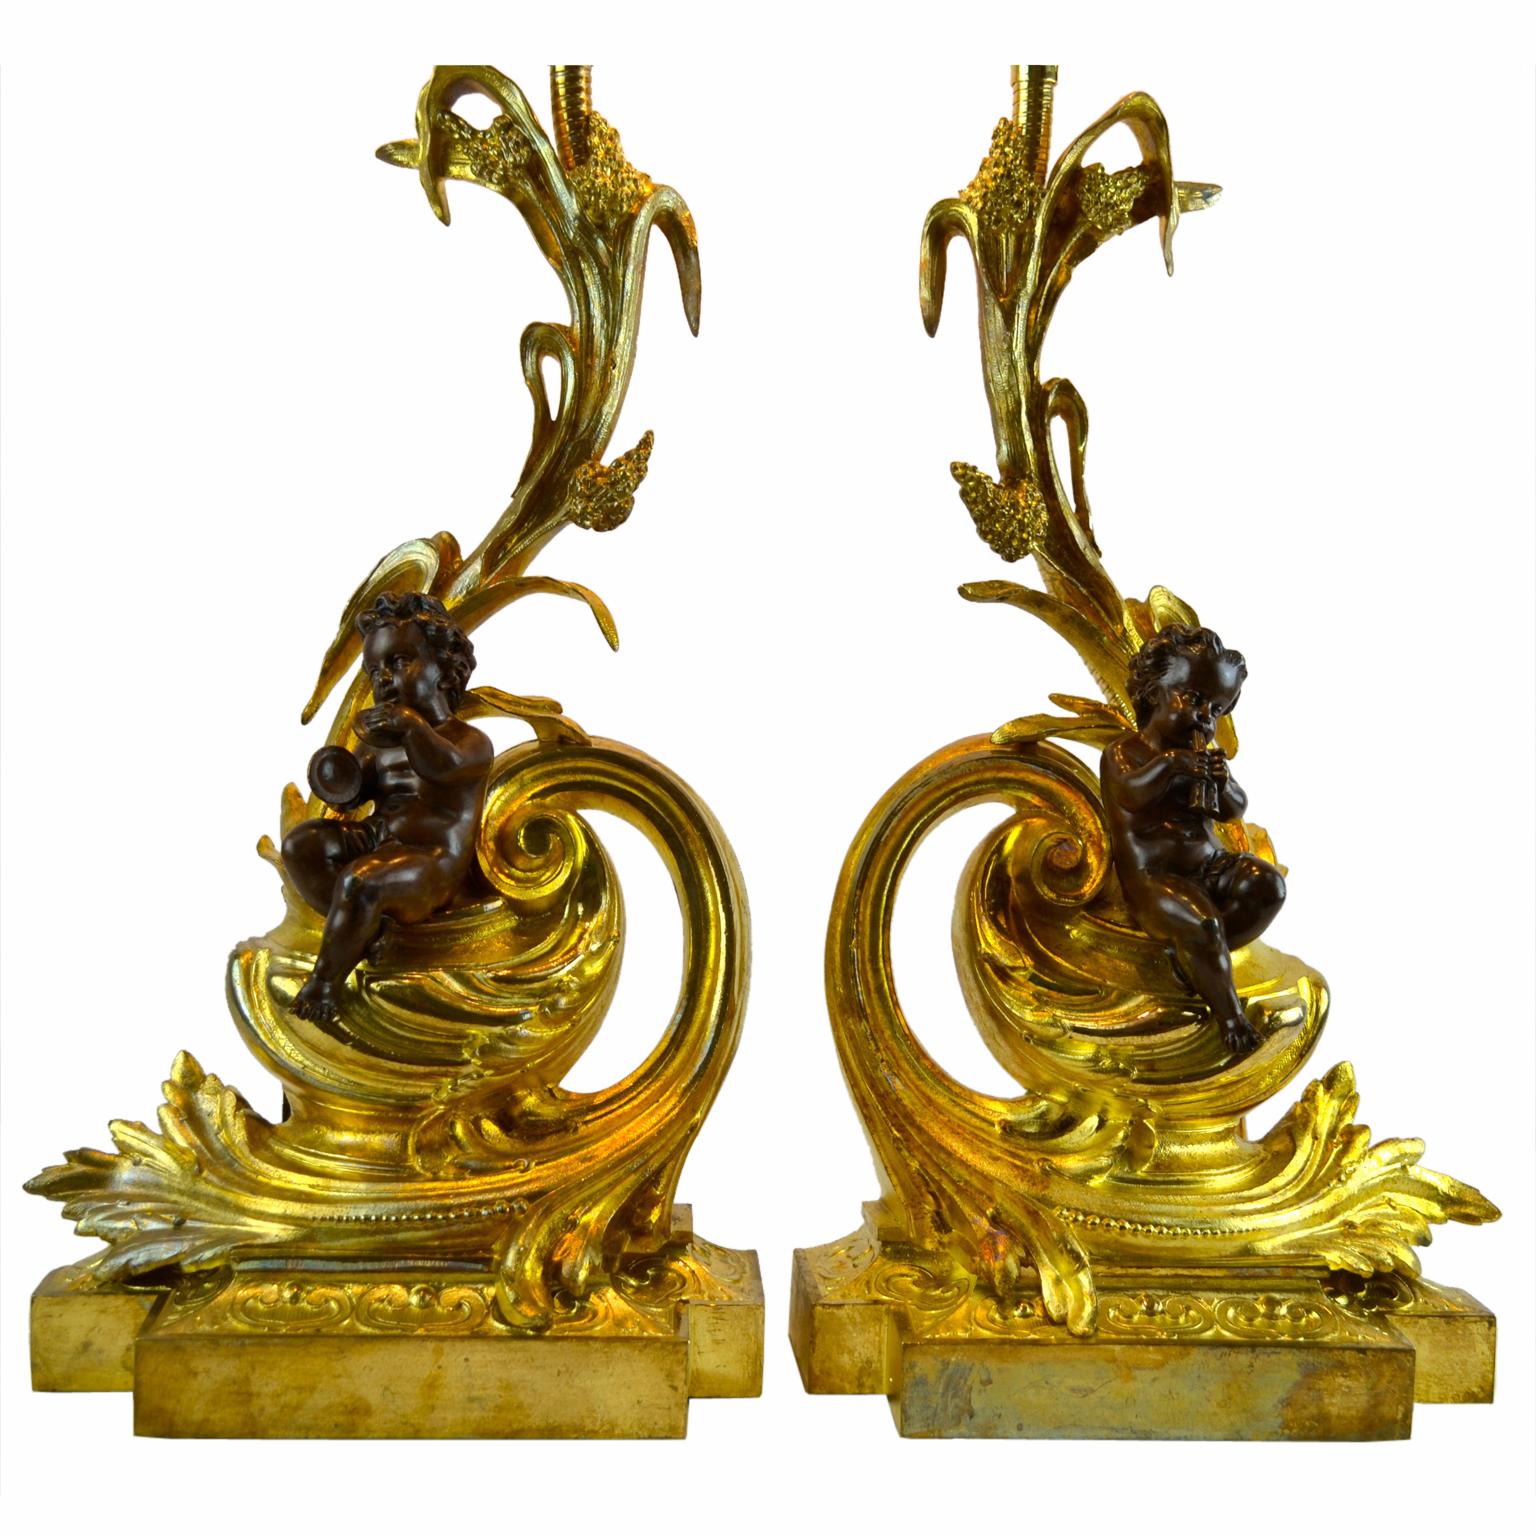 A pair of lamps made out of Louis XV style gilt and patinated bronze of chenets or fireplace andirons) The elaborate gilt bronze Rococo scrolling bases are entwined by seated patinated bronze cupids each playing a musical instrument. The upper